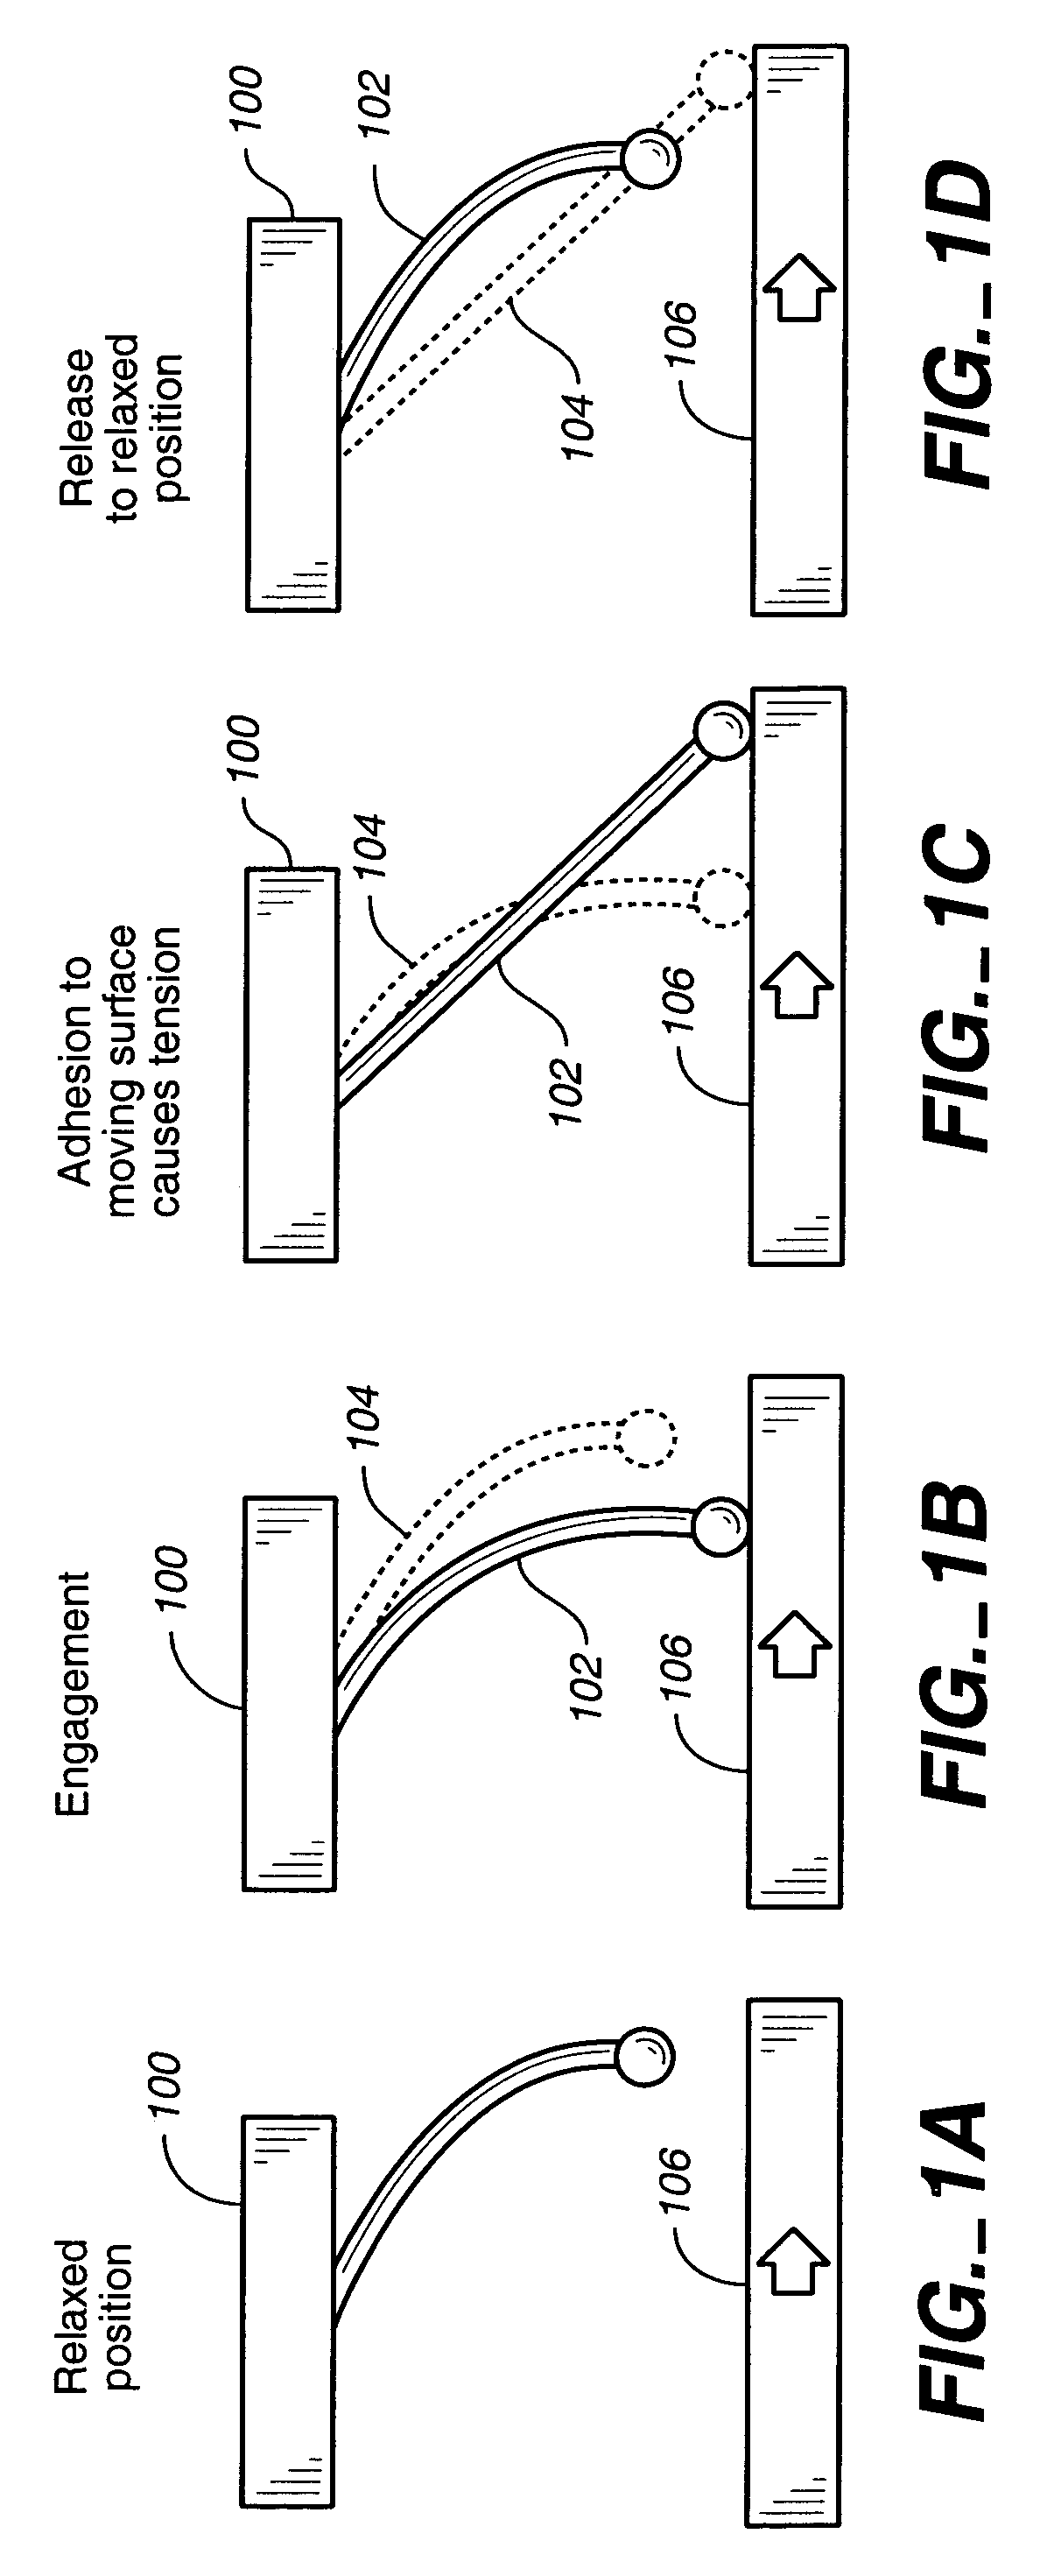 Structure having nano-fibers on annular curved surface, method of making same and method of using same to adhere to a surface